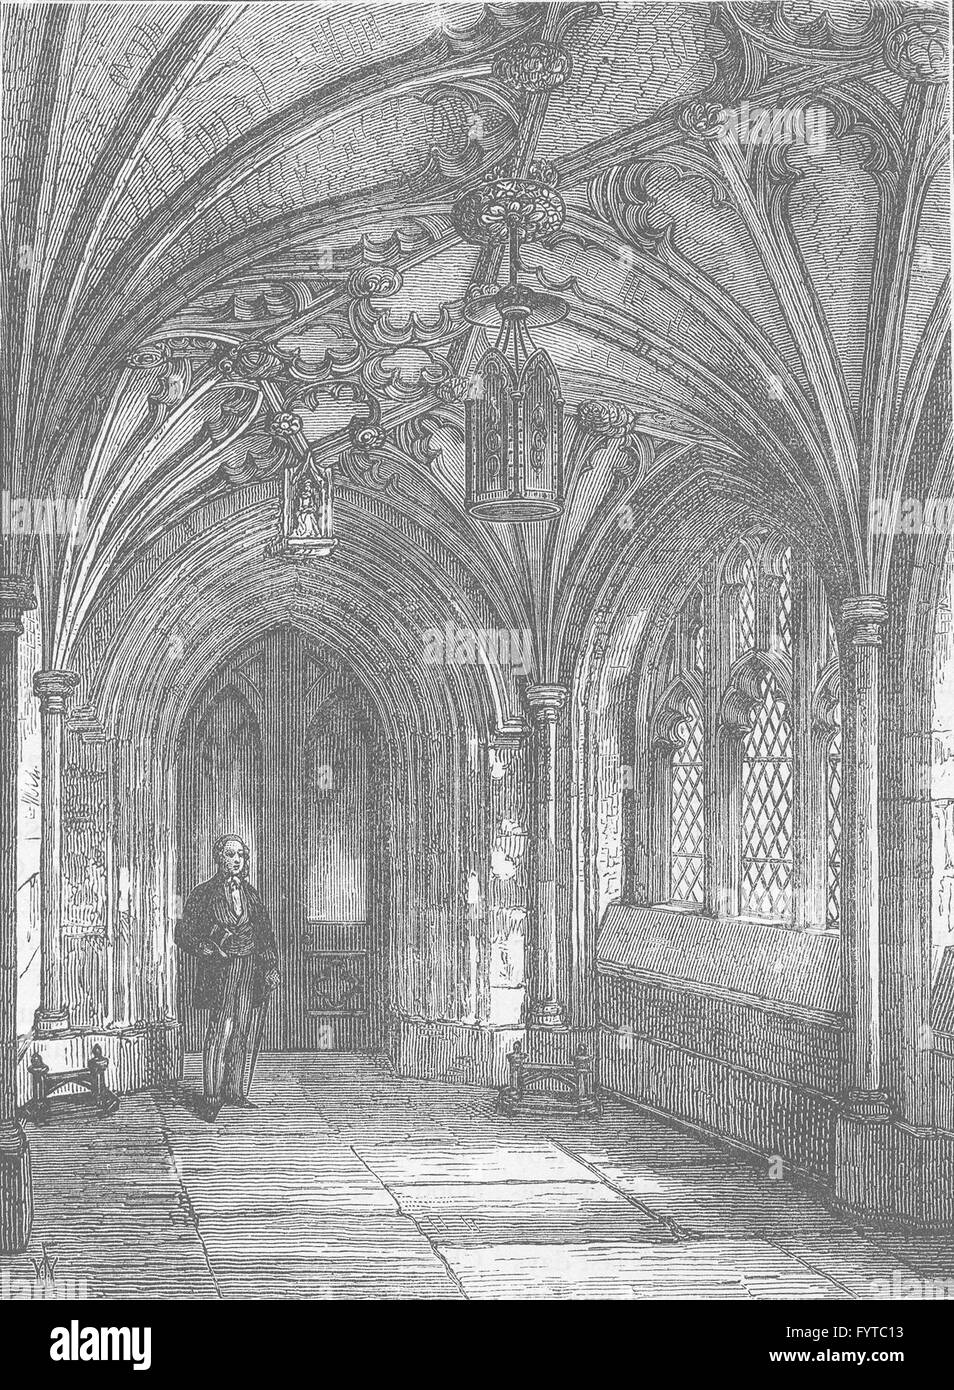 CITY OF LONDON: Porch of St.Sepulchre-without-Newgate church, old print c1880 Stock Photo